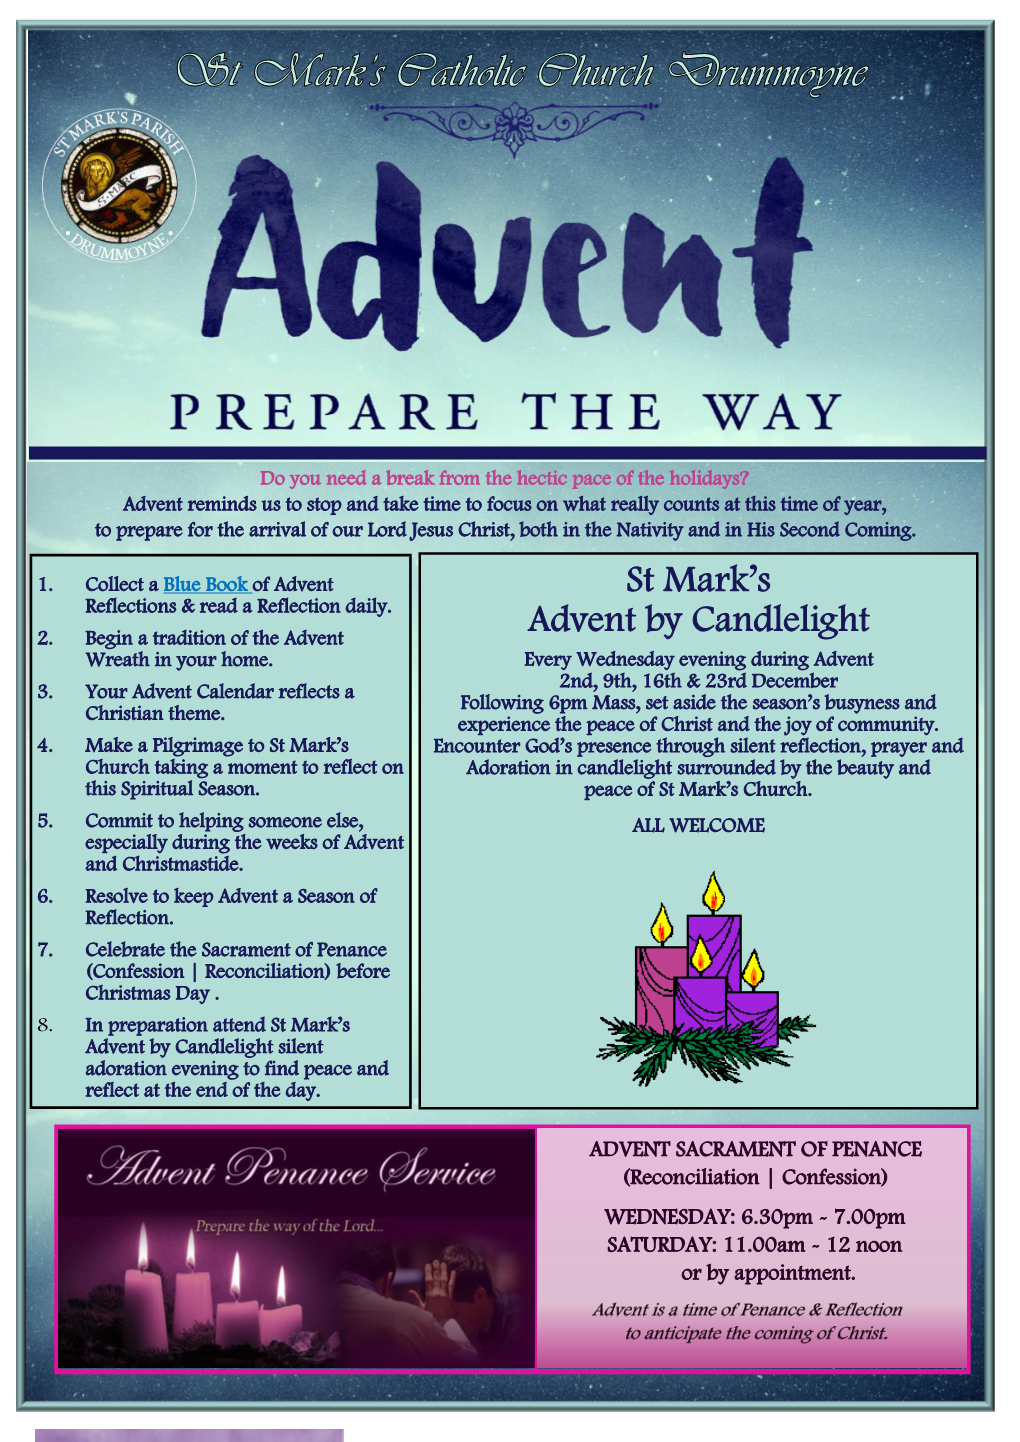 St Mark's Advent by Candlelight